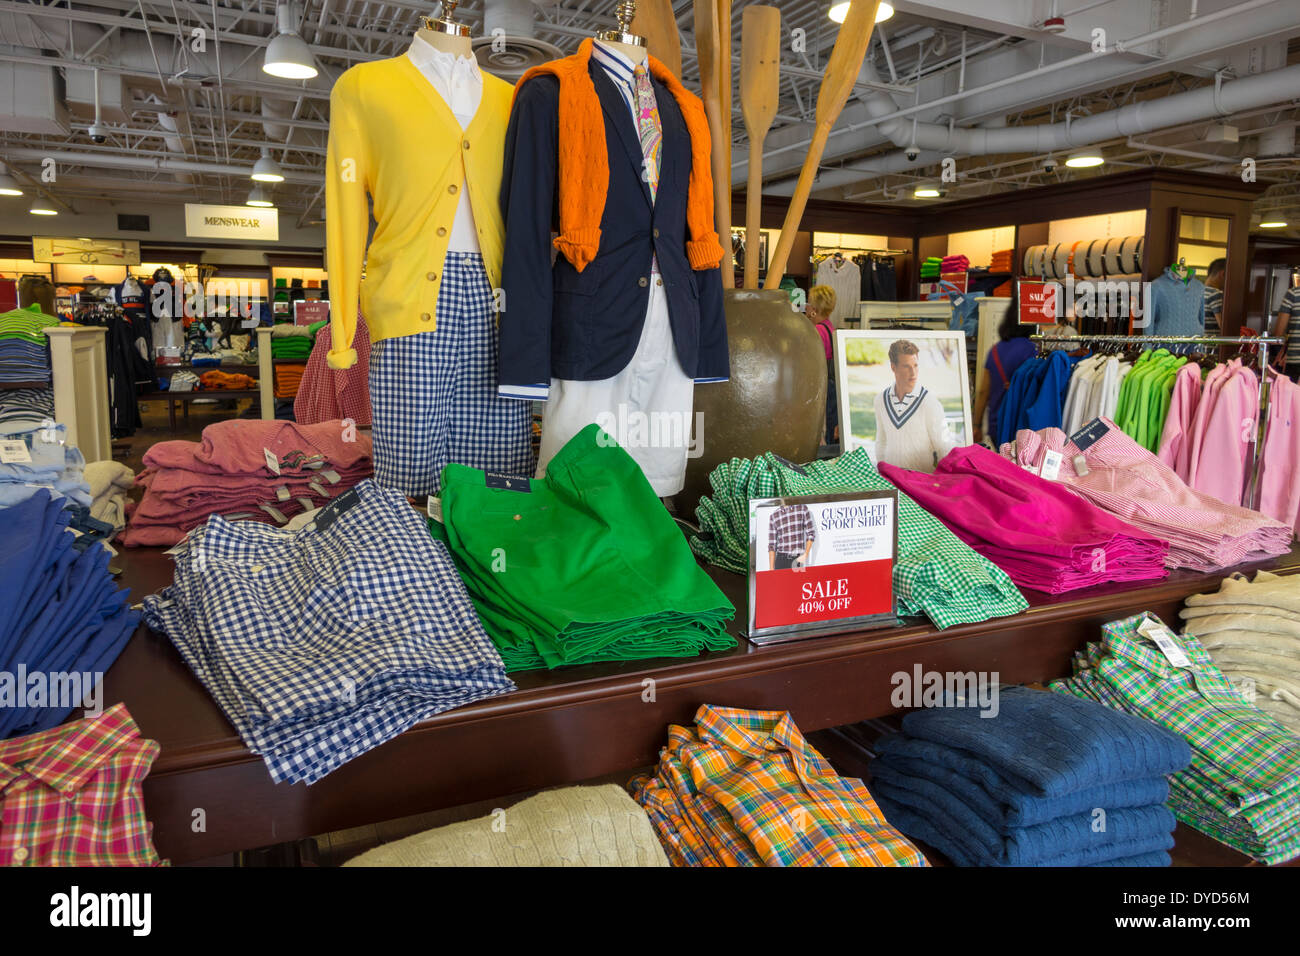 Ralph Lauren Store Interior High Resolution Stock Photography and Images -  Alamy